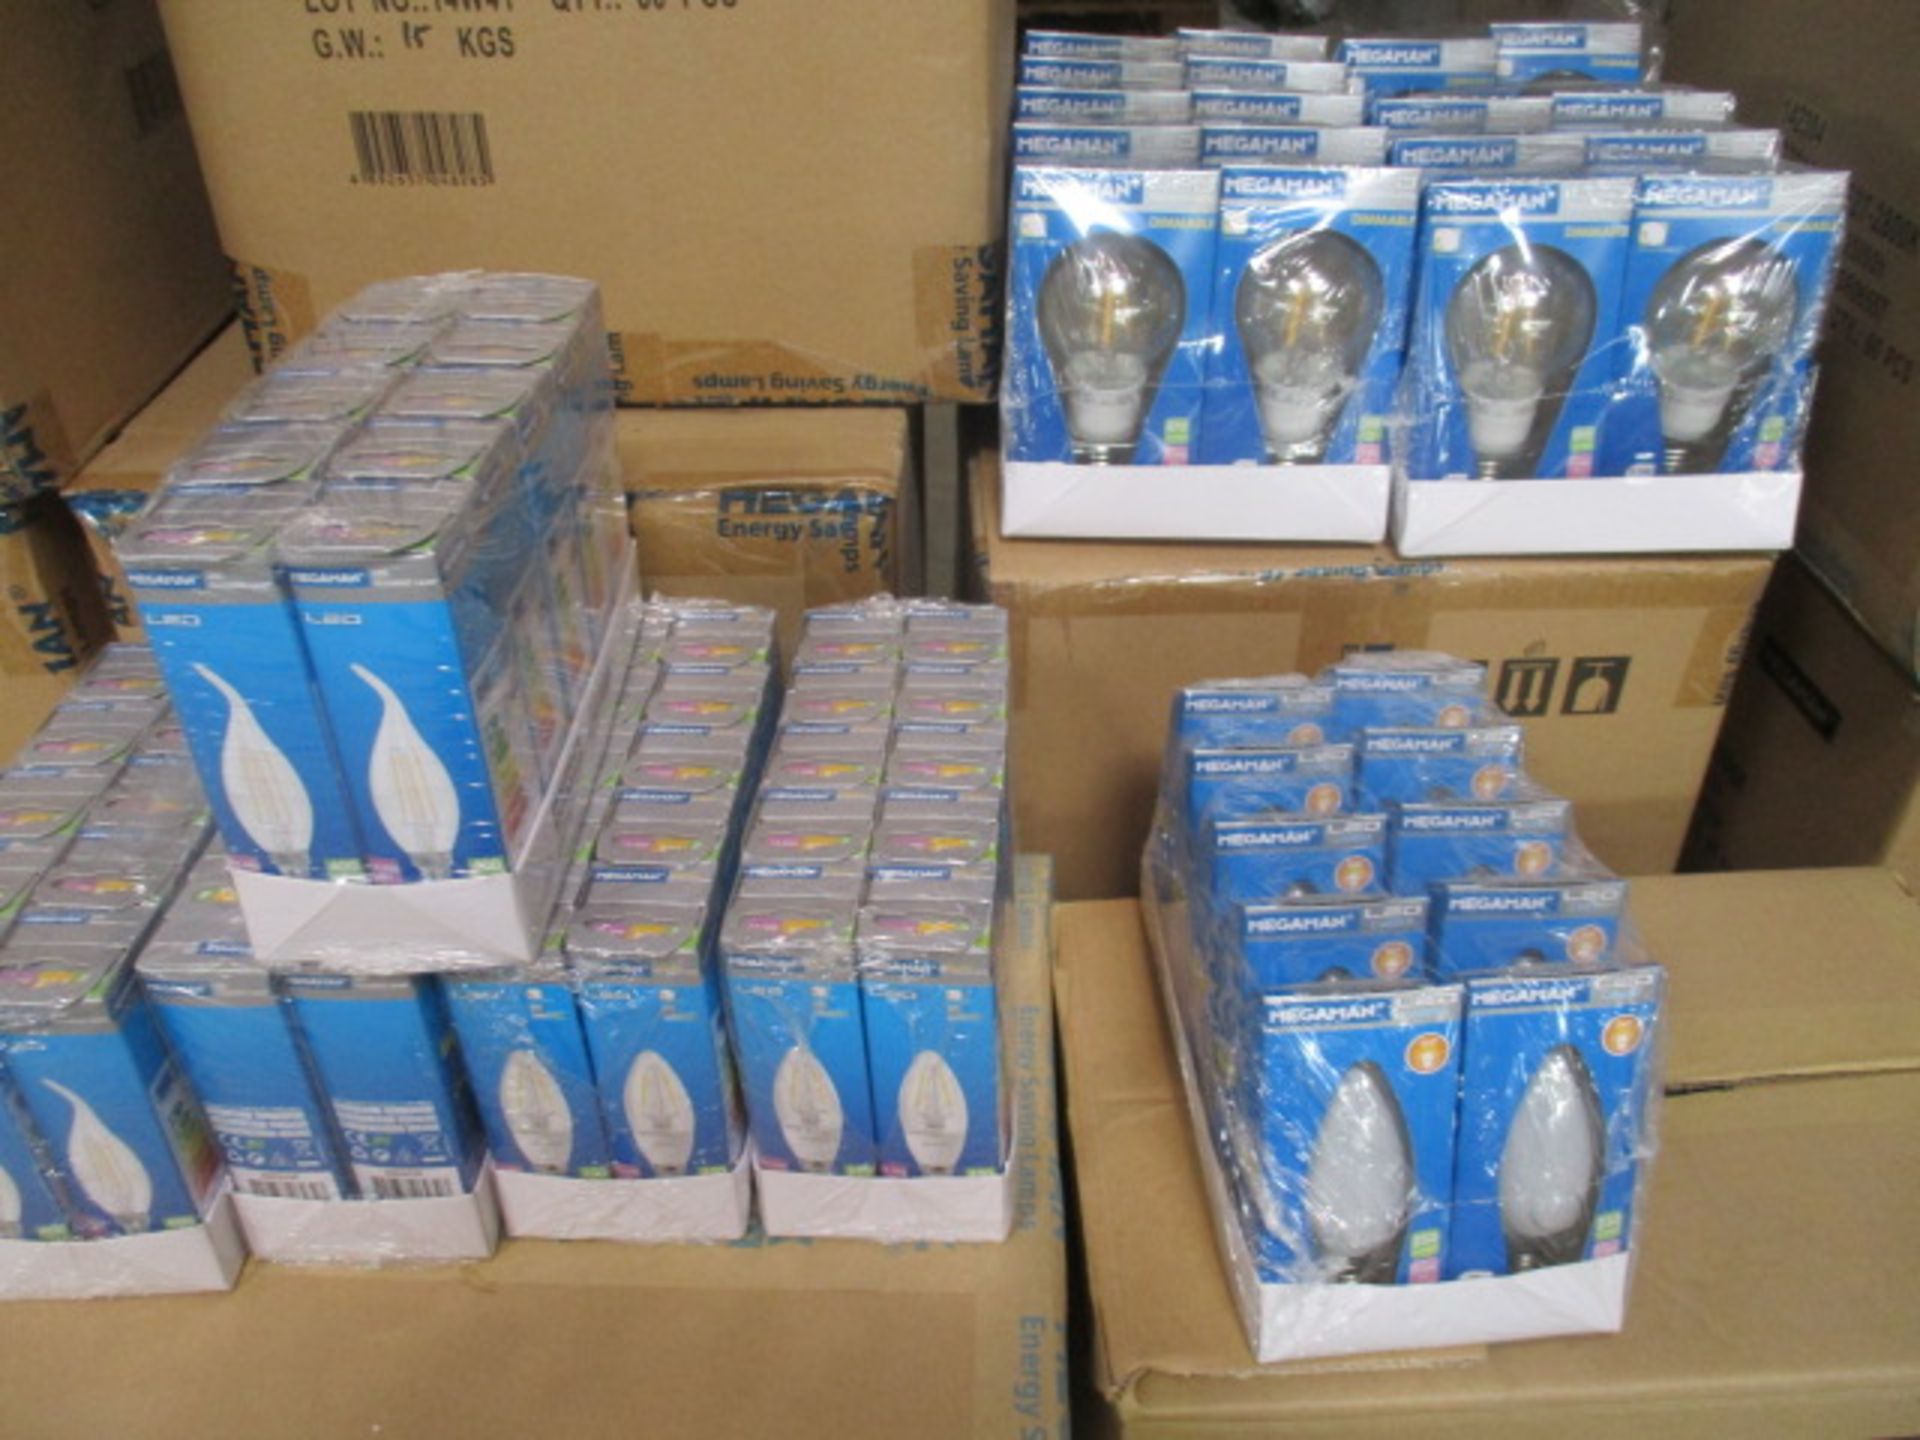 Approx. 10,000 Brand New Megaman LED Bulbs | Approx RRP £50,000+ - Image 21 of 30